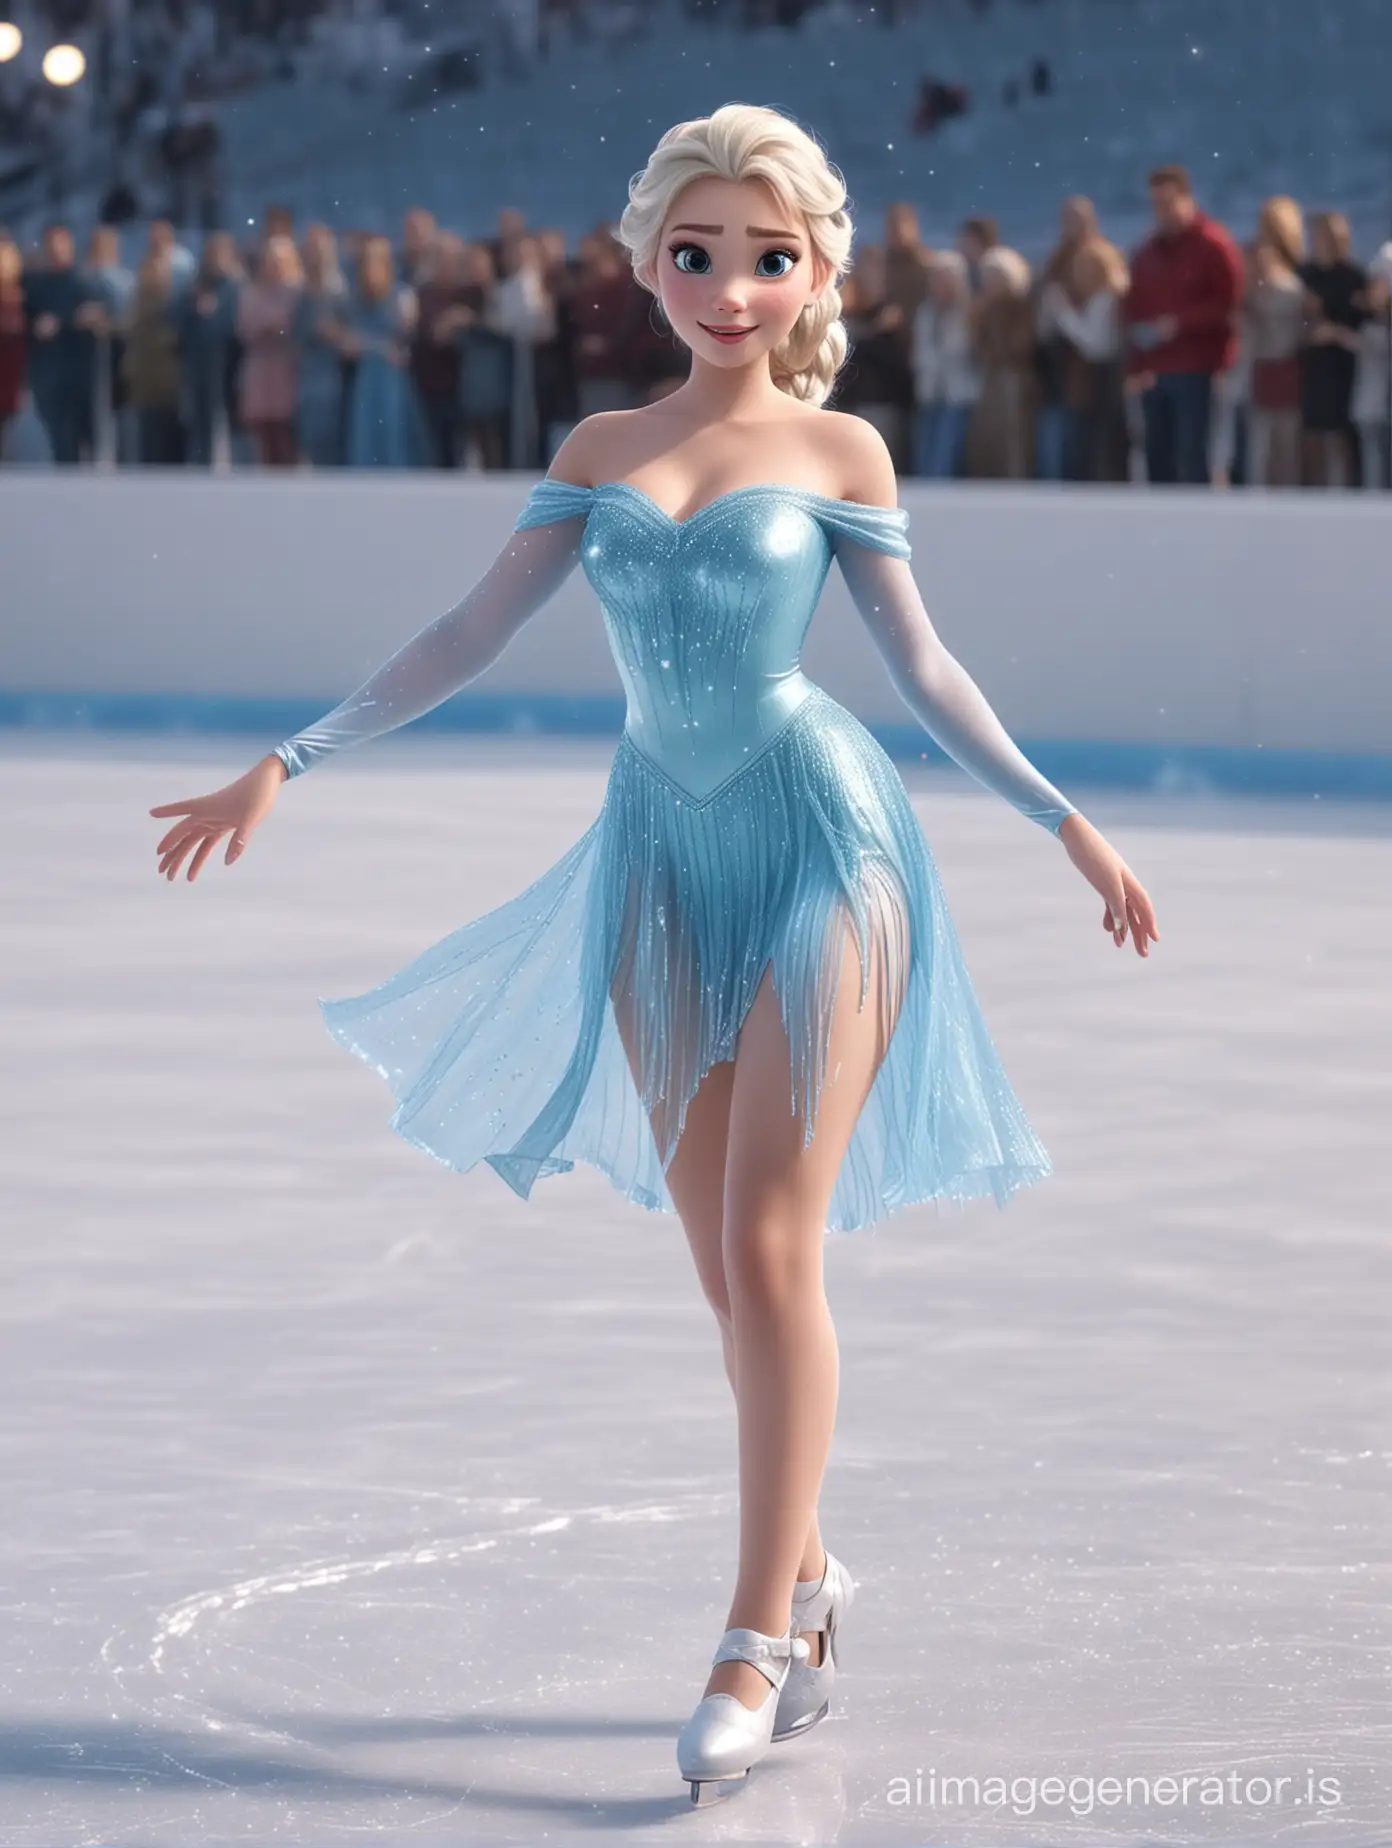 Elsa-in-Alluring-Ice-Blue-Spandex-at-a-Winter-Spectacle